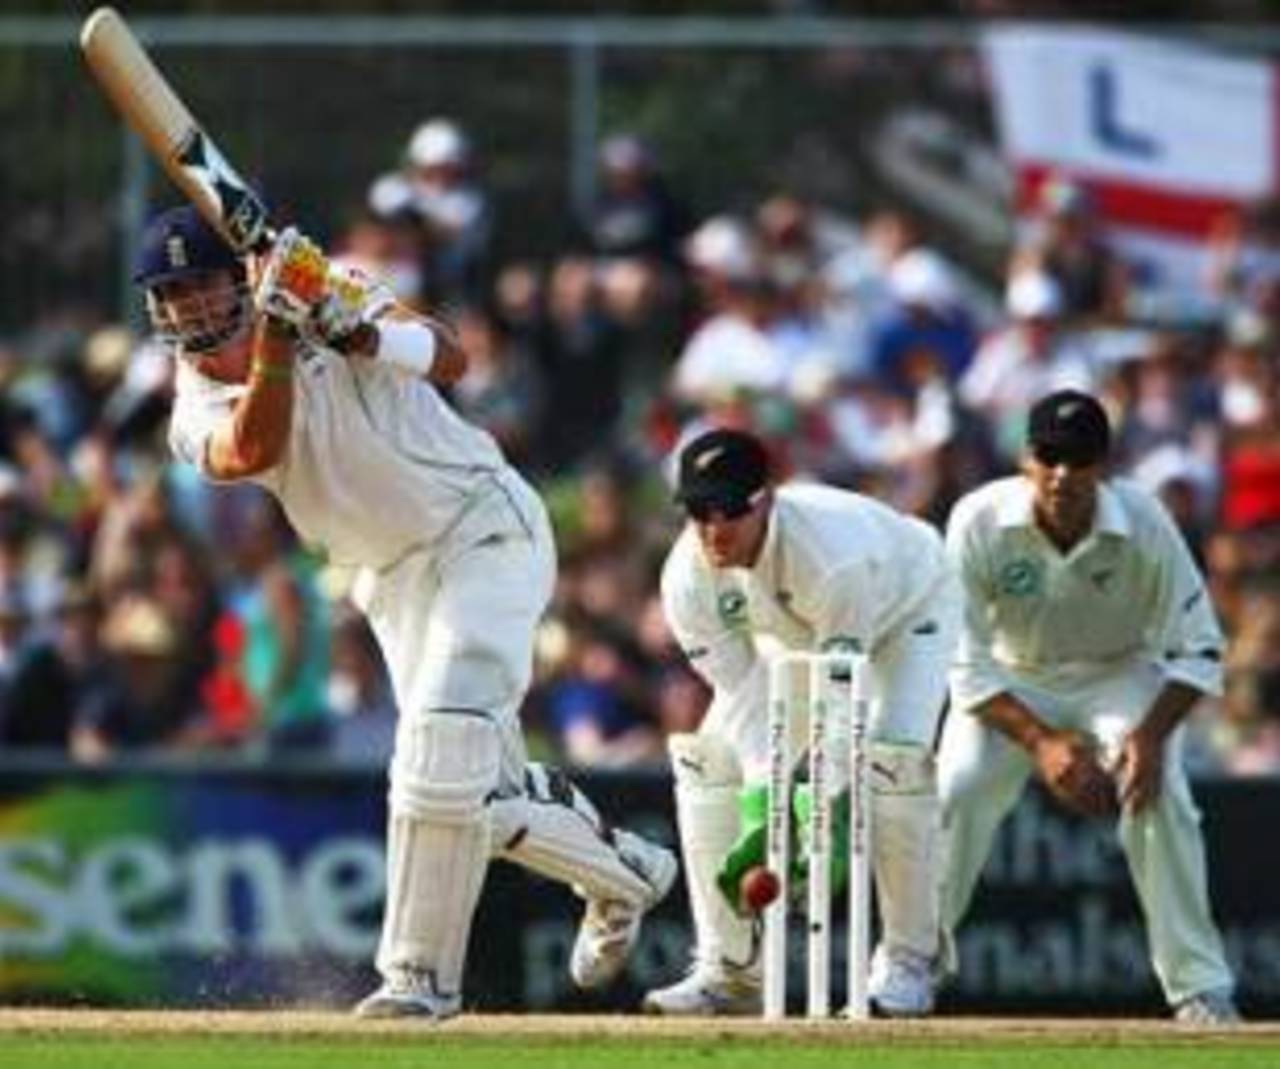 Kevin Pietersen whips one through midwicket, New Zealand v England, 3rd Test, Napier, March 22, 2008